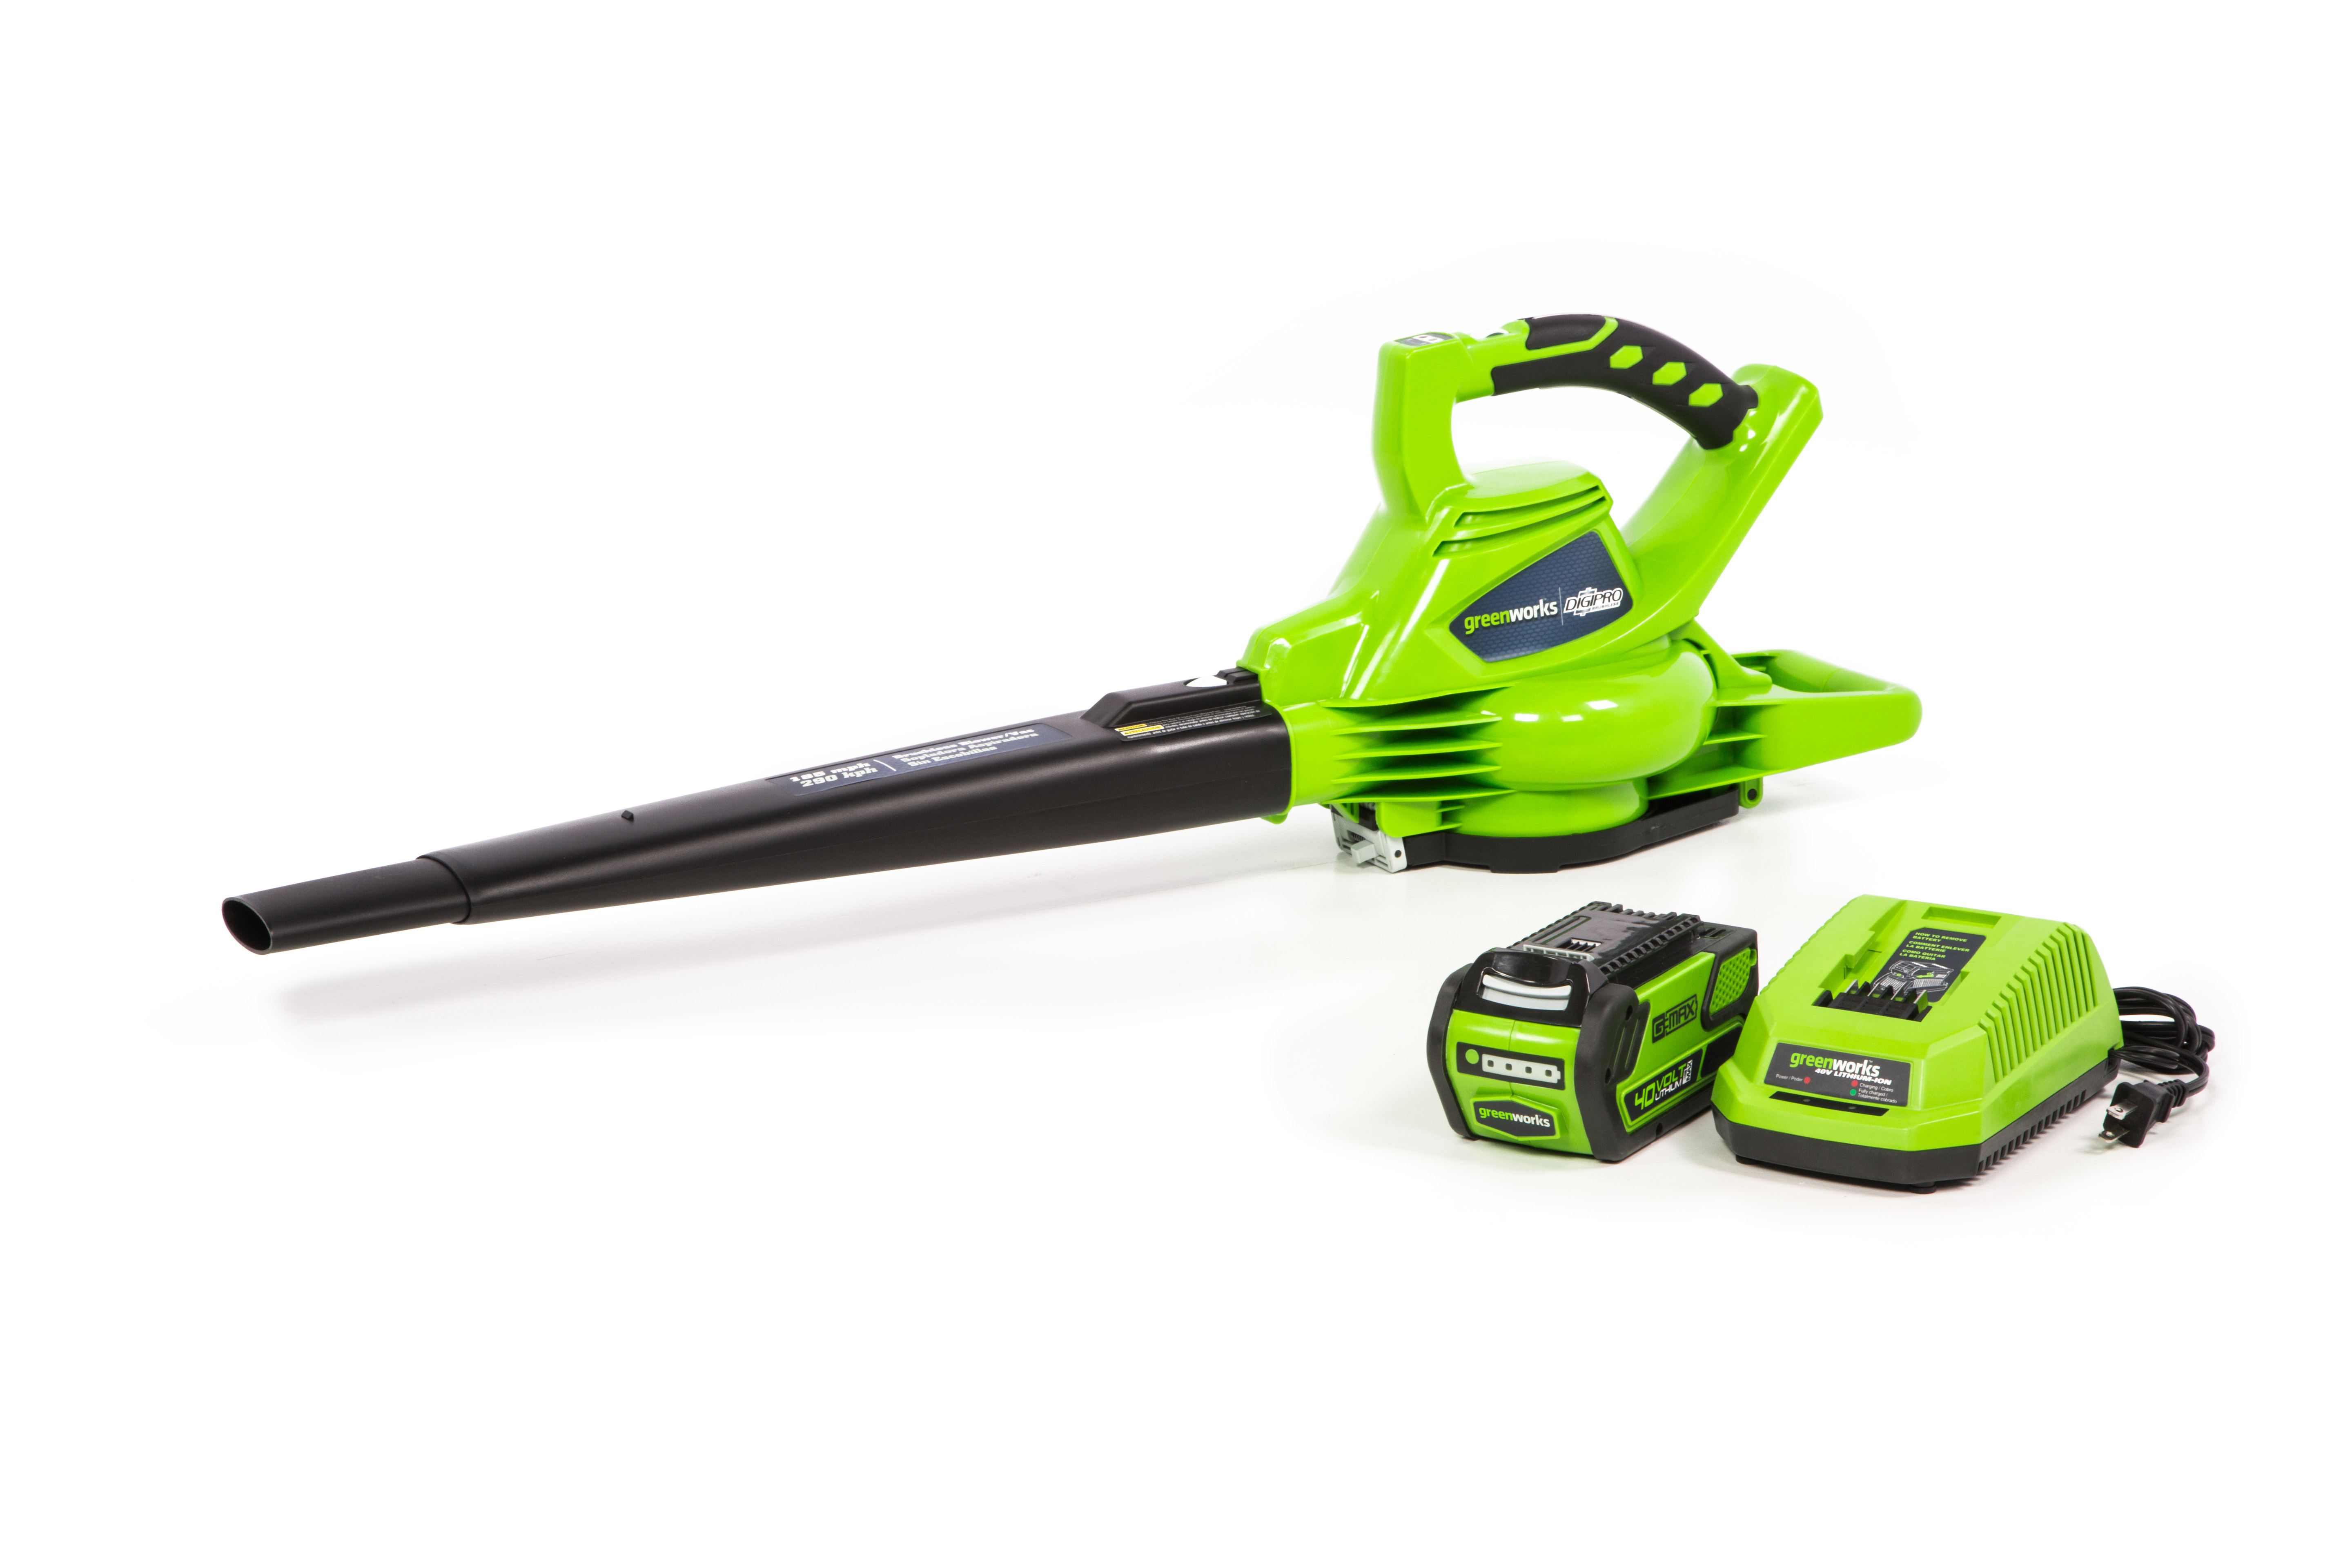 Greenworks 40V 340 CFM Leaf Blower/Vacuum with 4.0 Ah Battery and Charger, 24322 - image 1 of 7